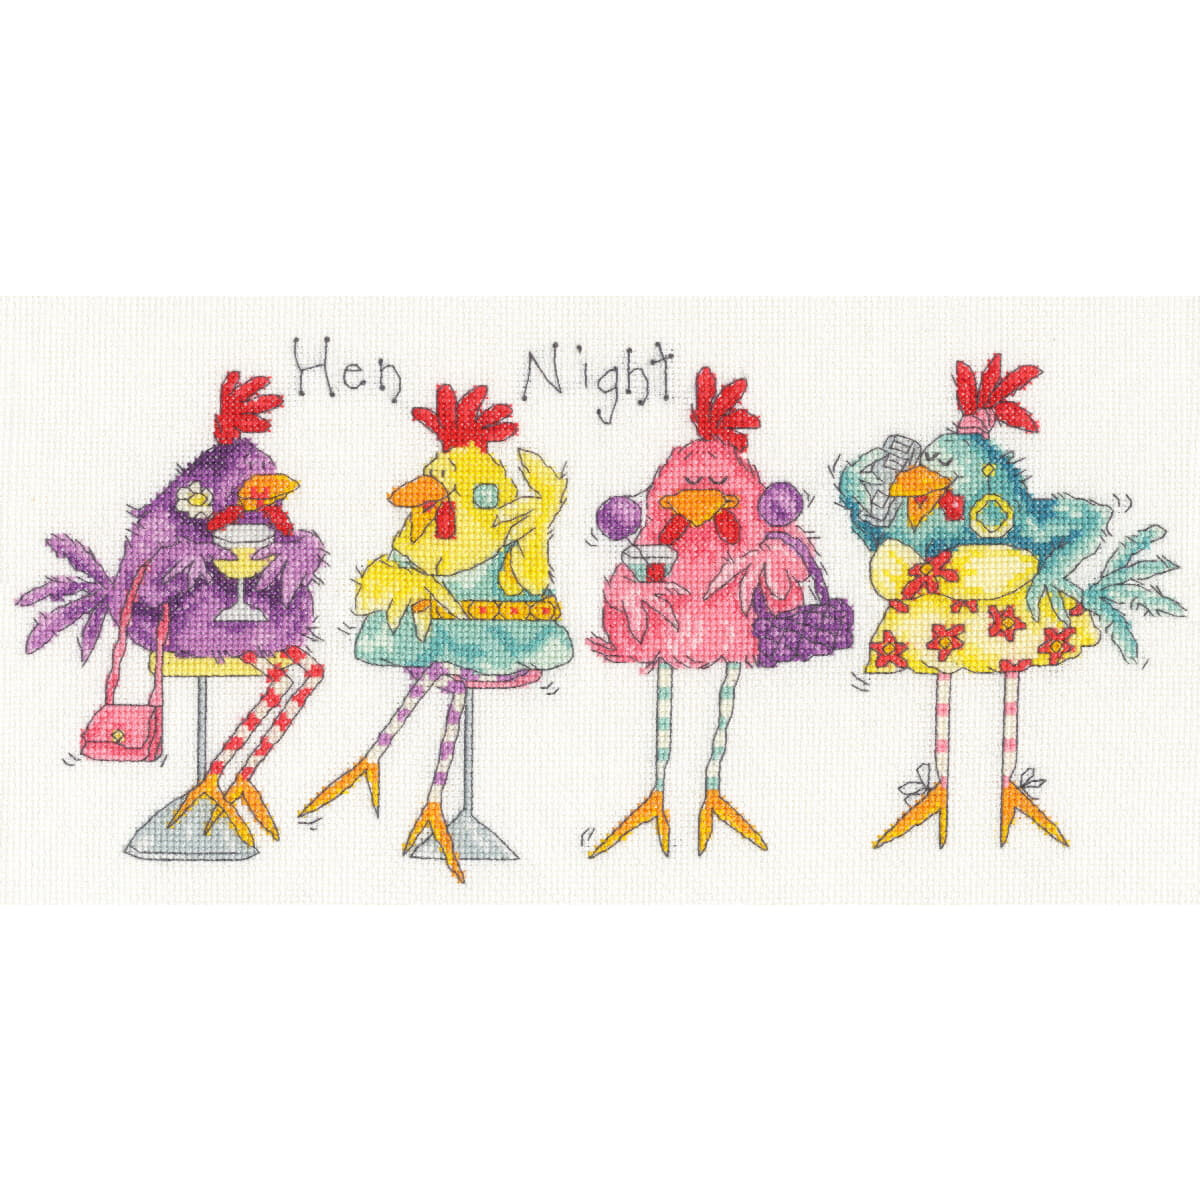 Four cartoon chickens are pictured in colorful outfits...